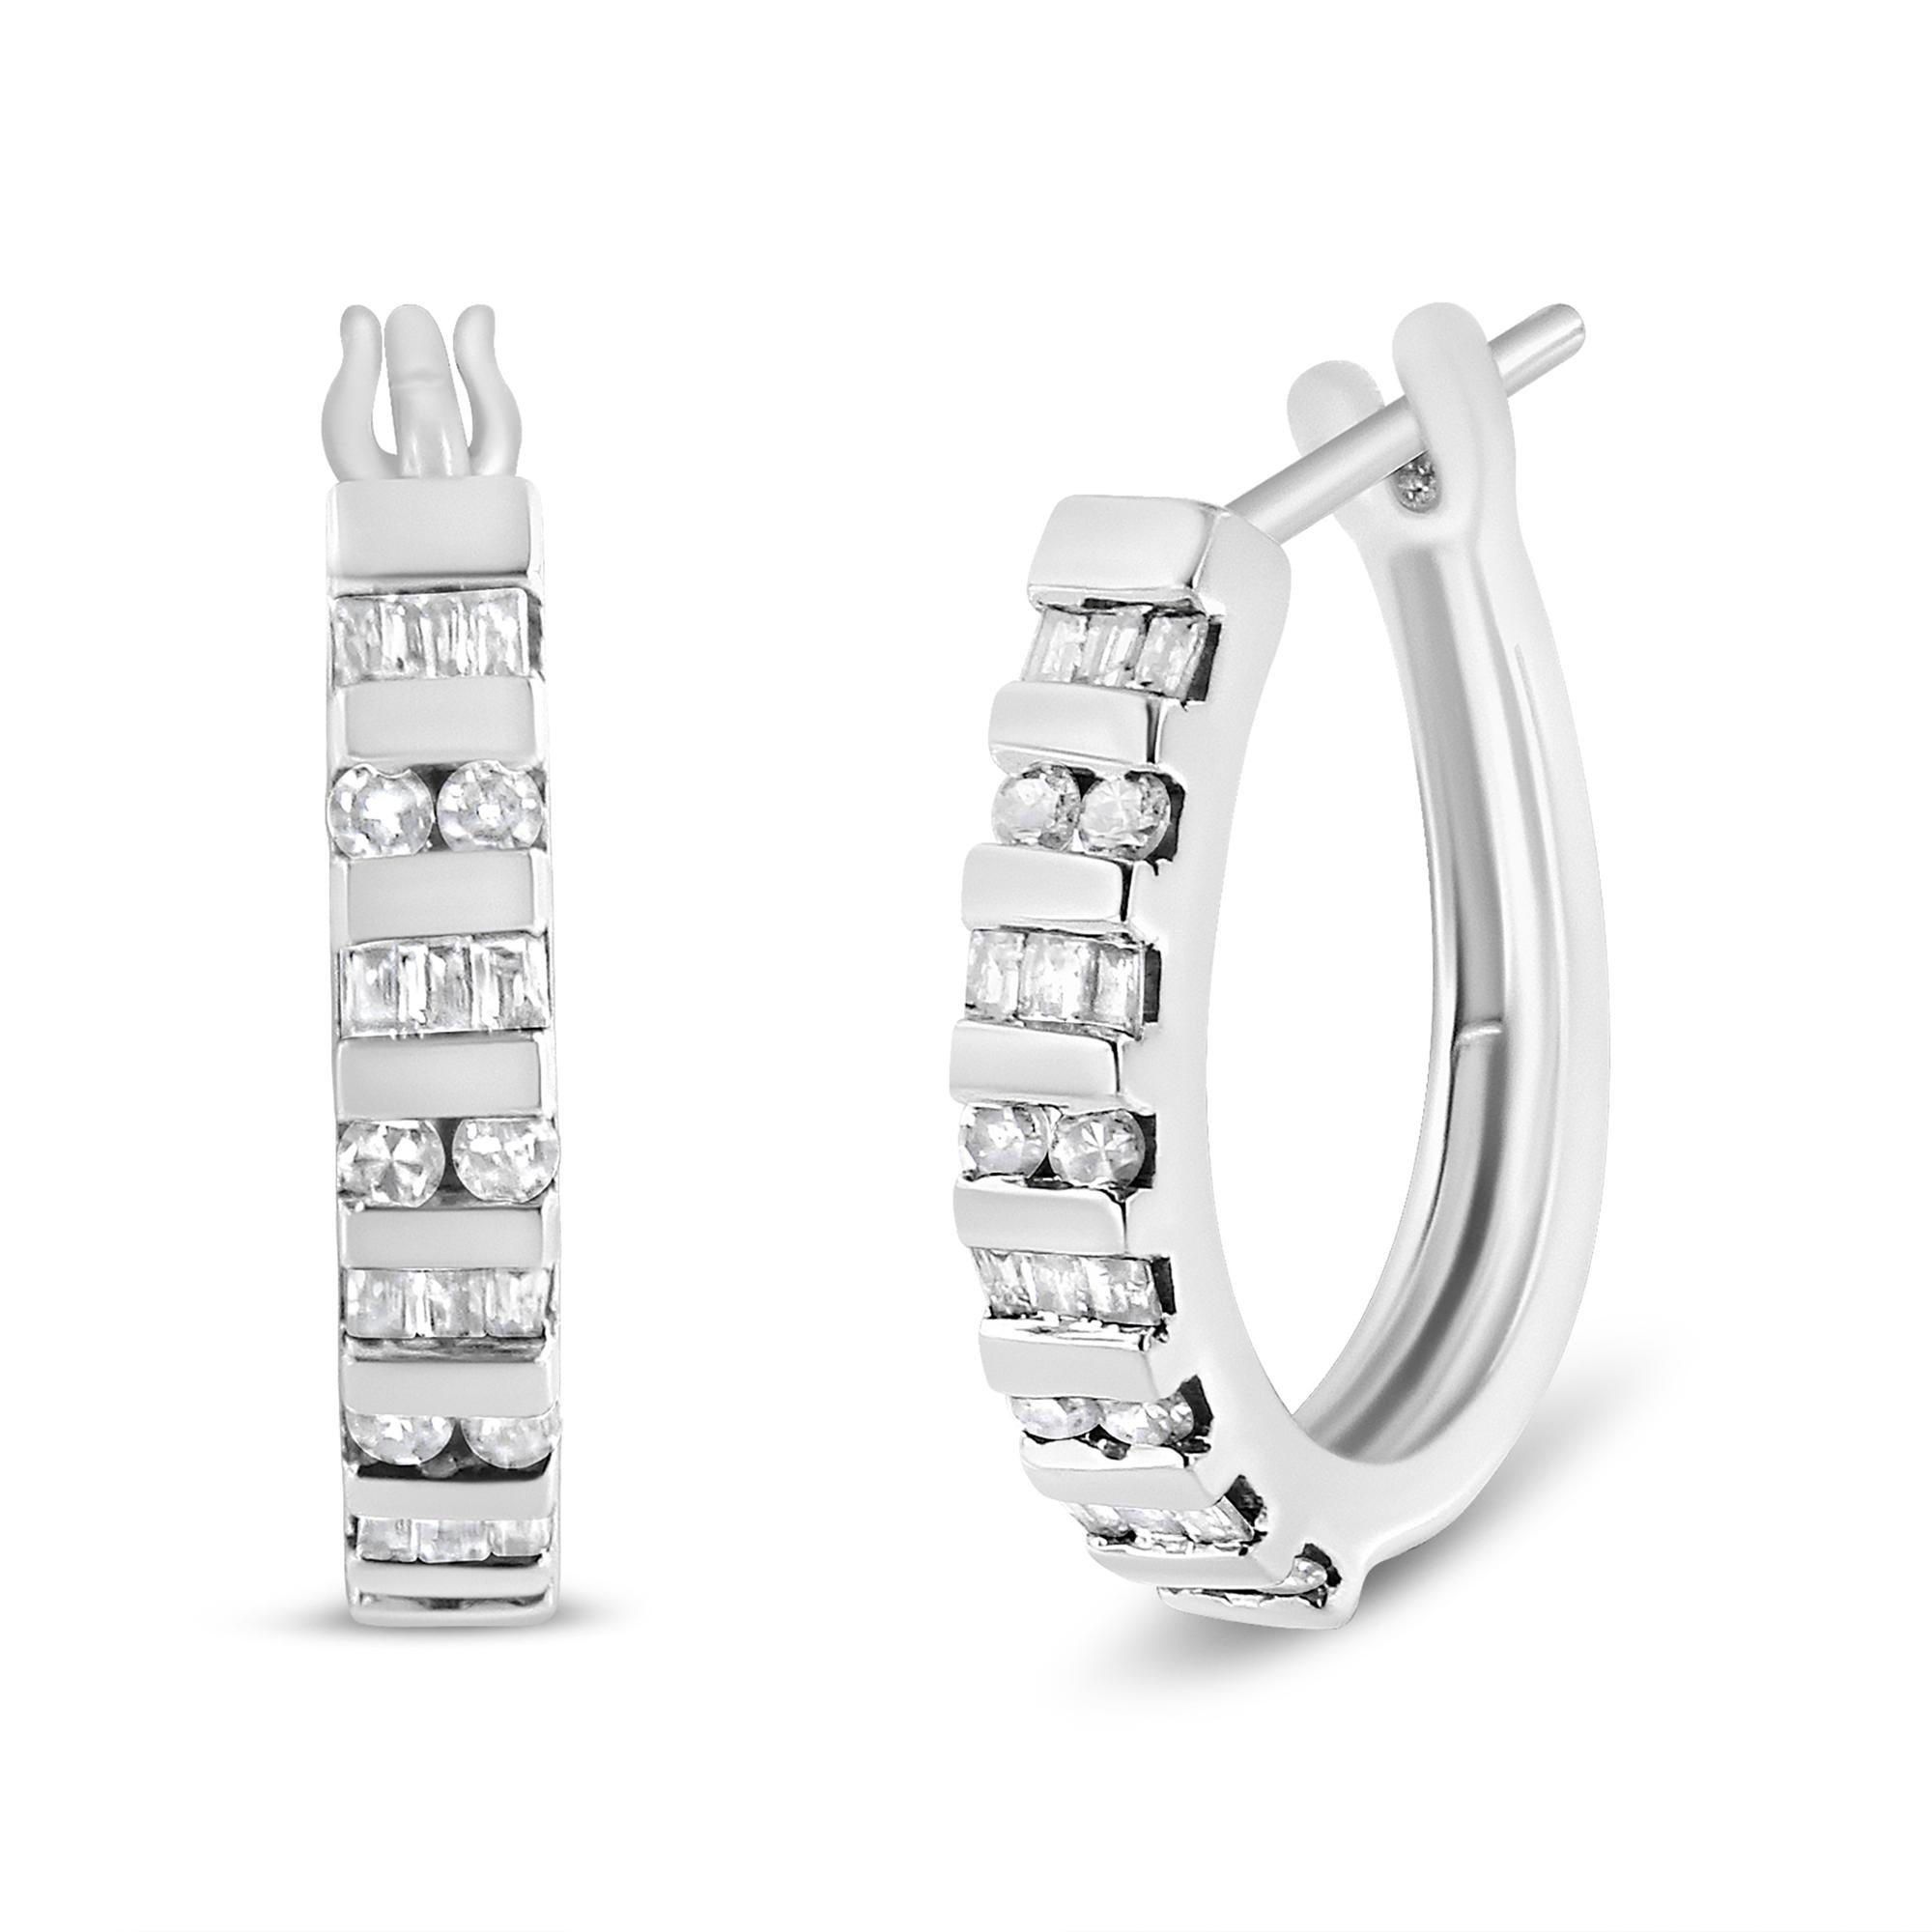 10K Gold Round and Baguette-Cut Diamond Hoop Earrings (I-J Color, I2-I3 Clarity)